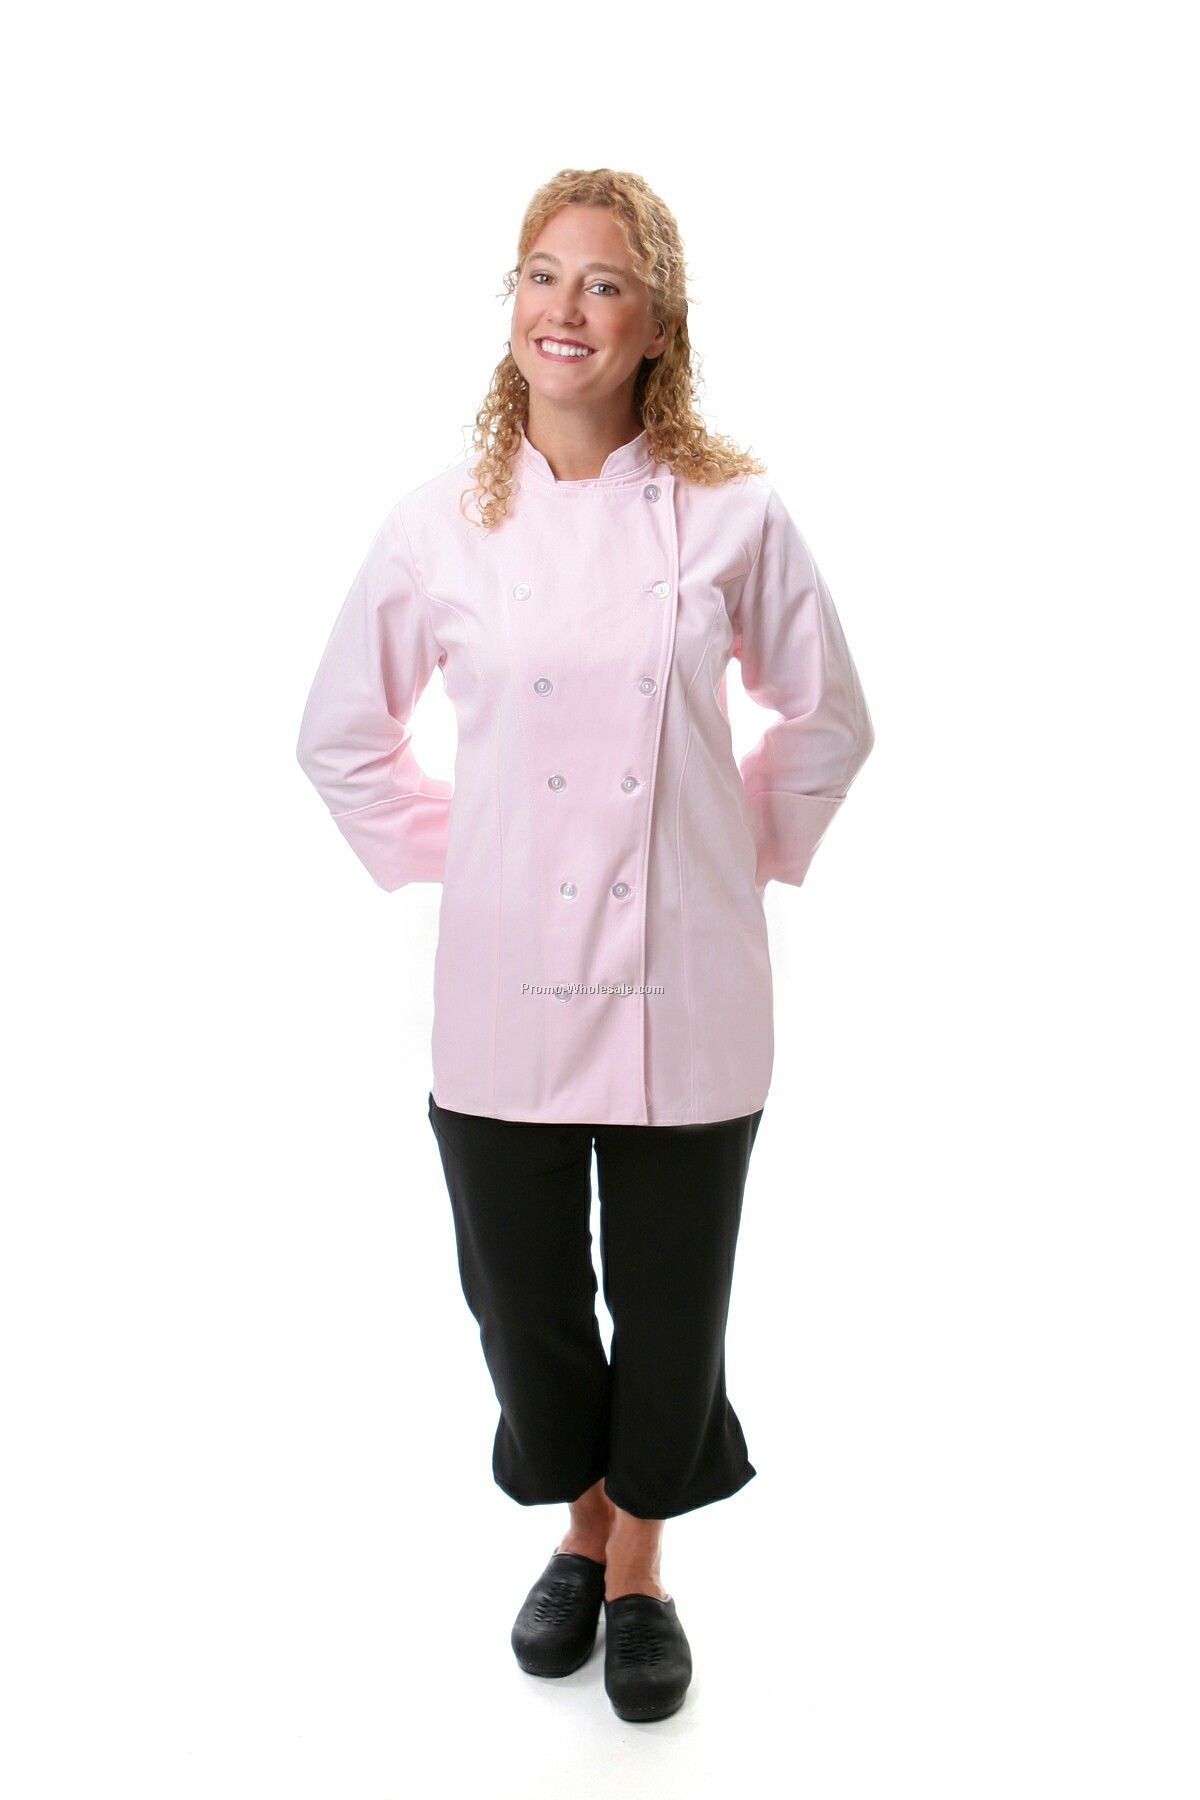 Ladies' Fitted Chef Coat - Pink (3x-large)